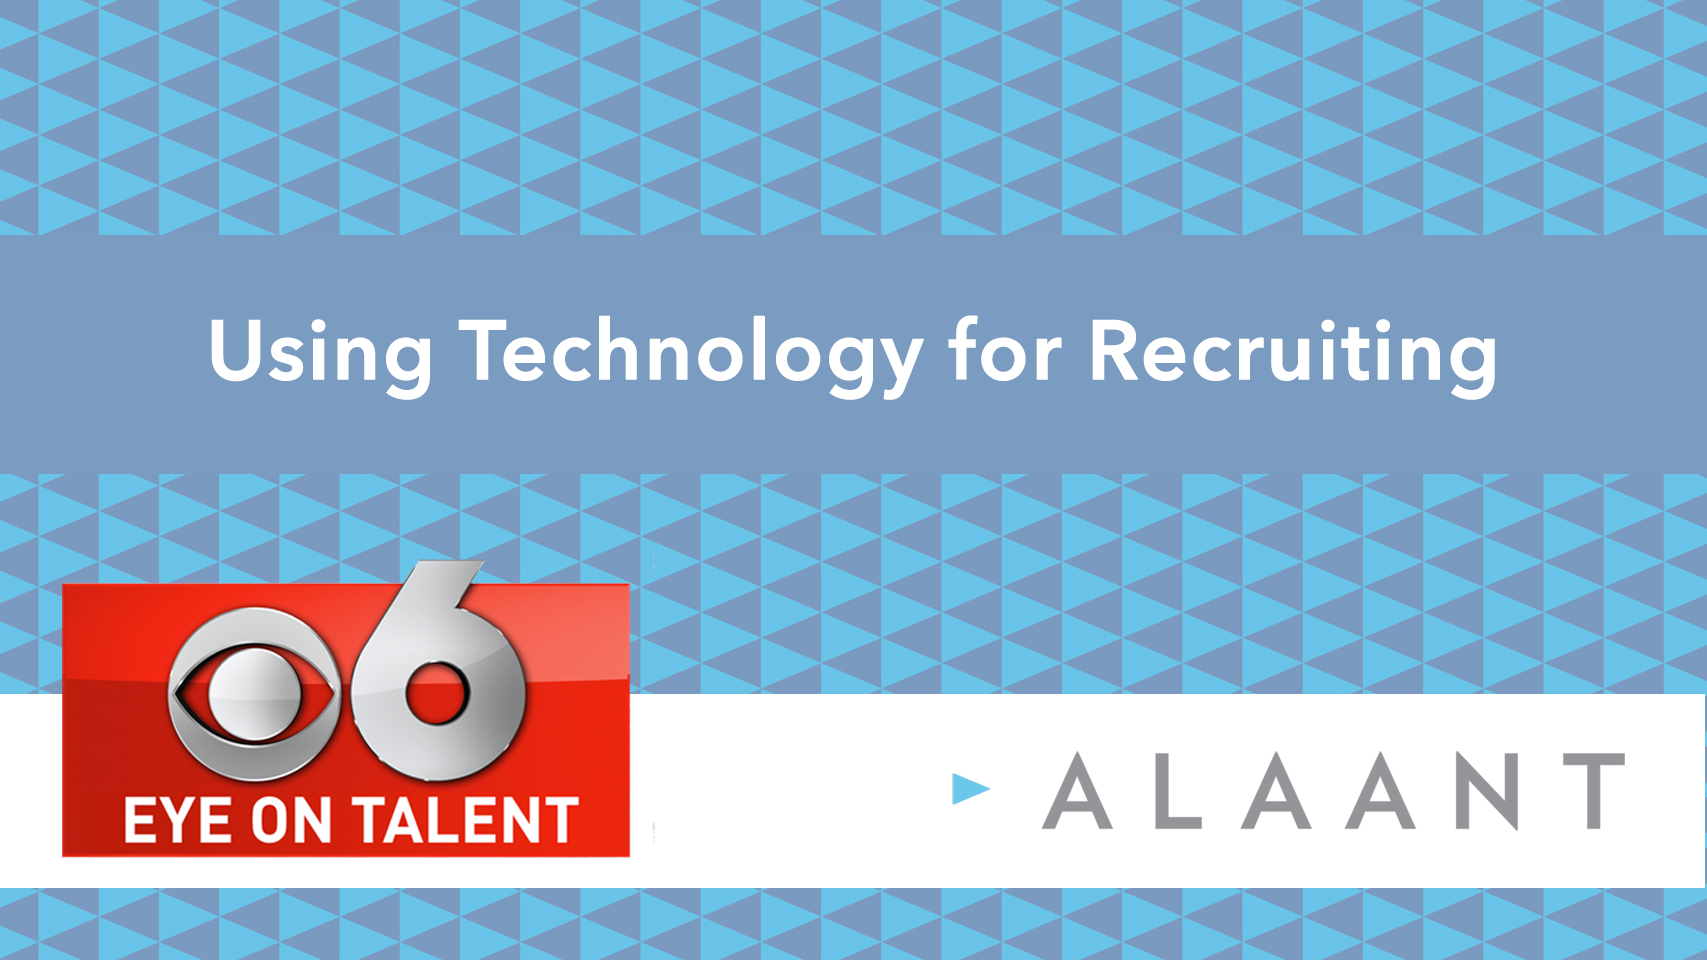 eye on talent alaant using technology for recruiting